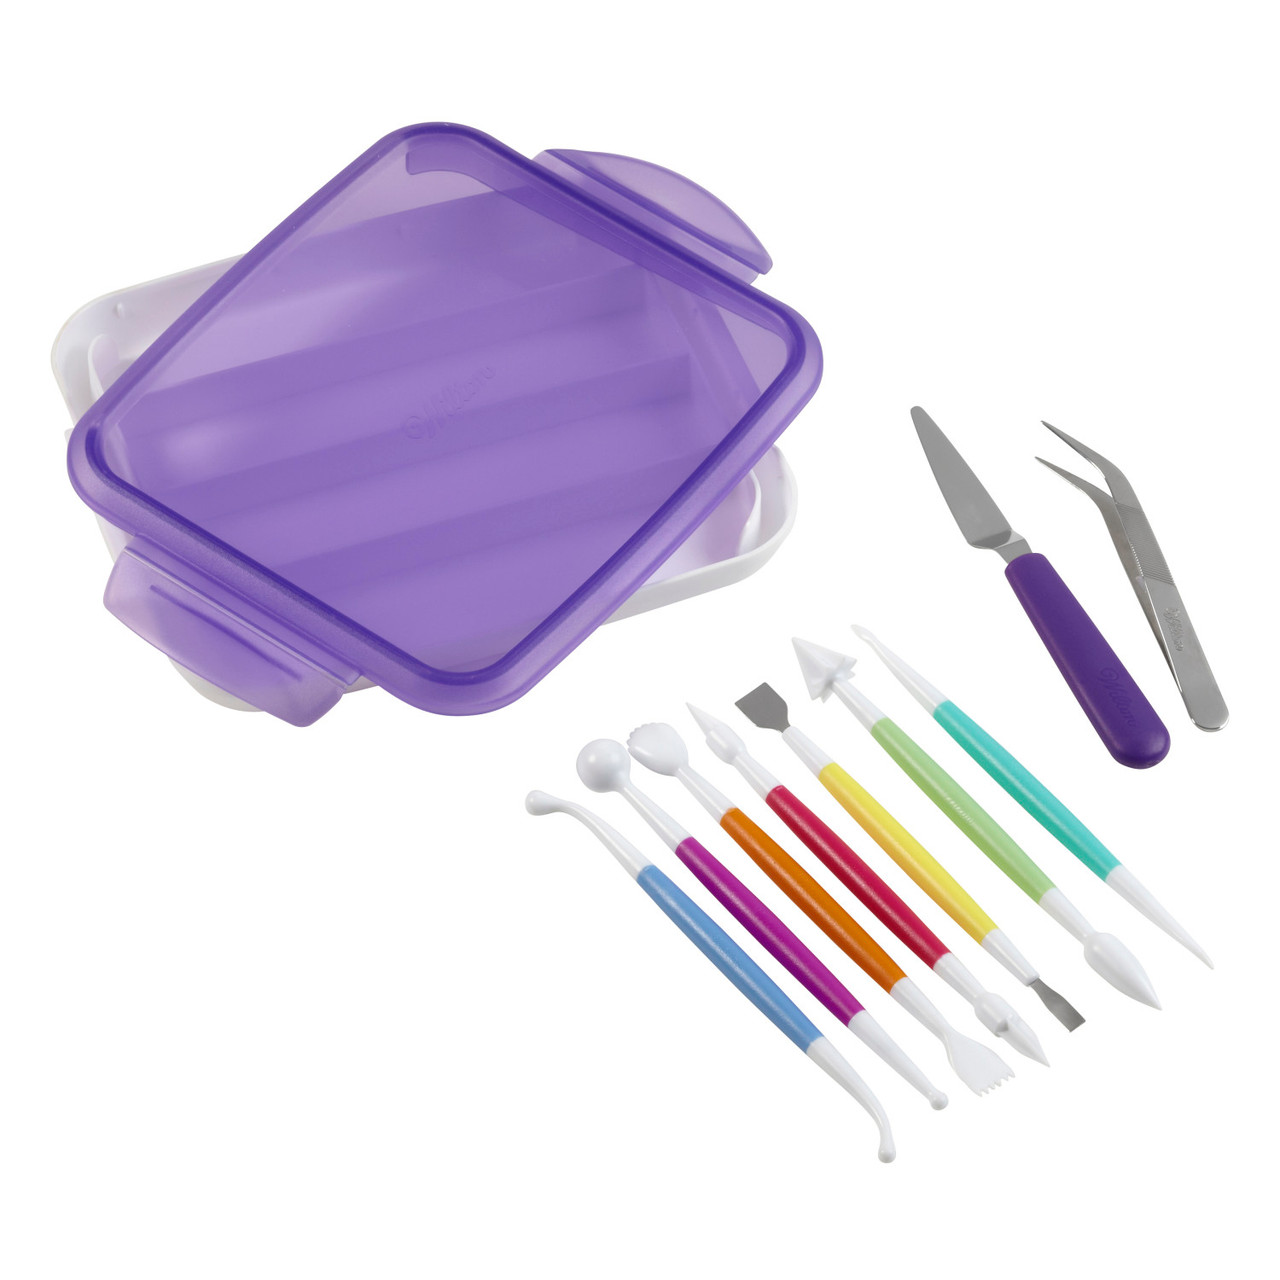 Wilton Fondant Cutter and Embosser Tool Set, 4-Piece — Every